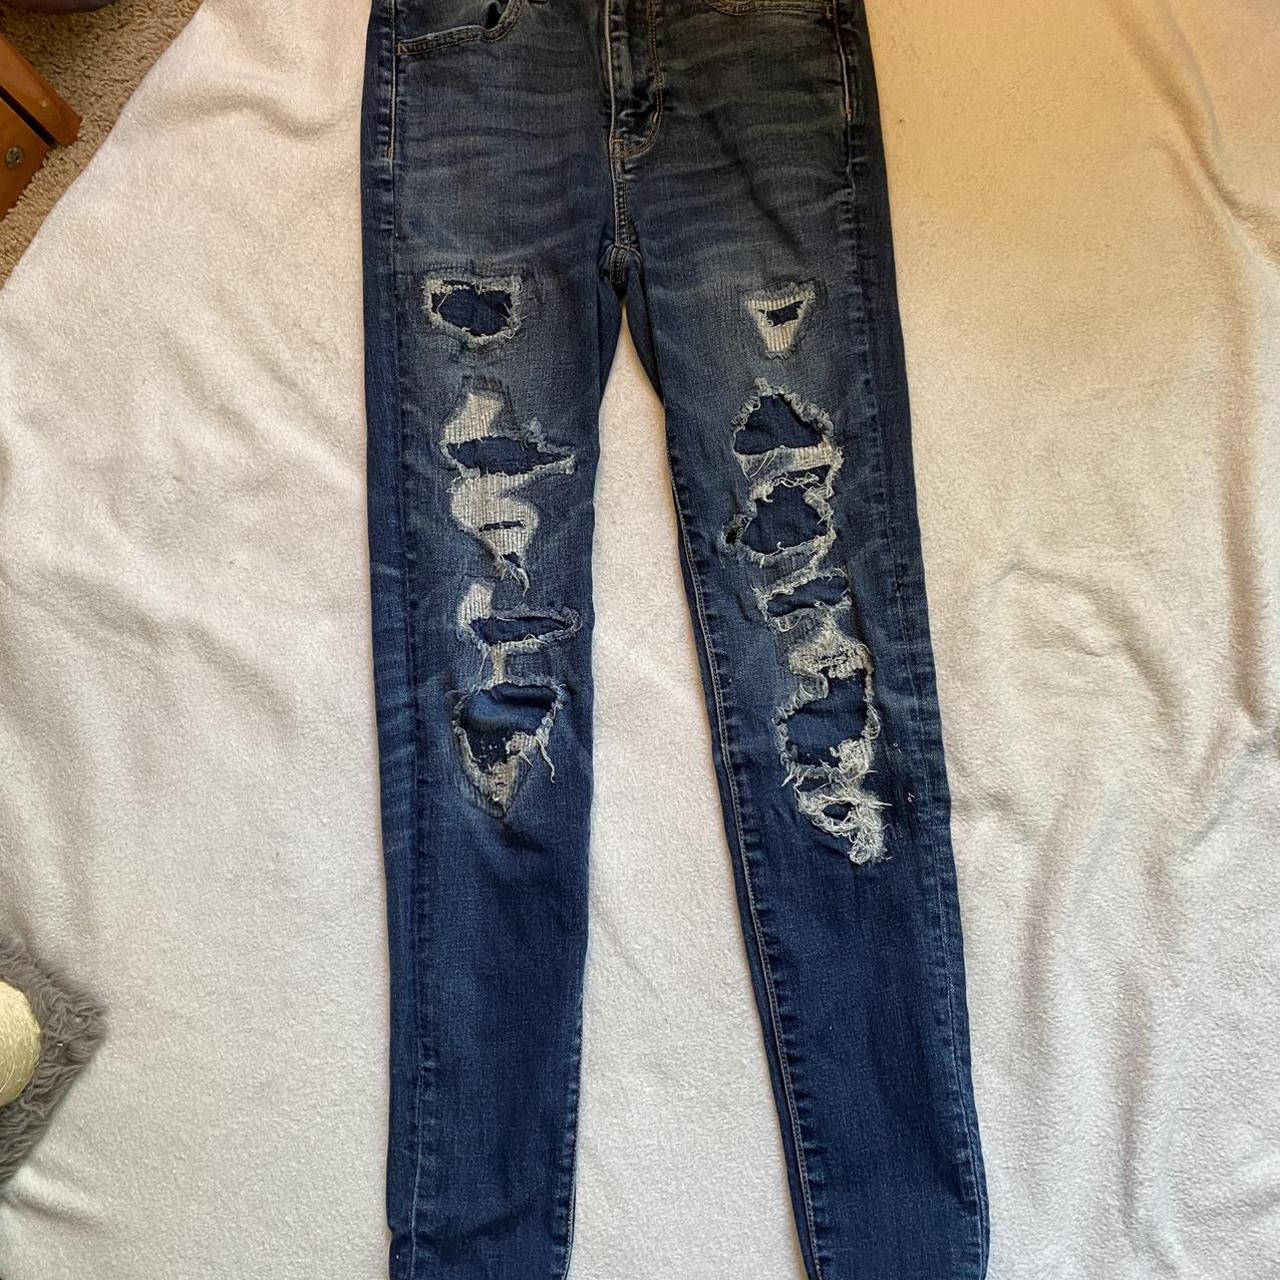 American Eagle Ripped Jeans #jeans #rippedjeans - Depop